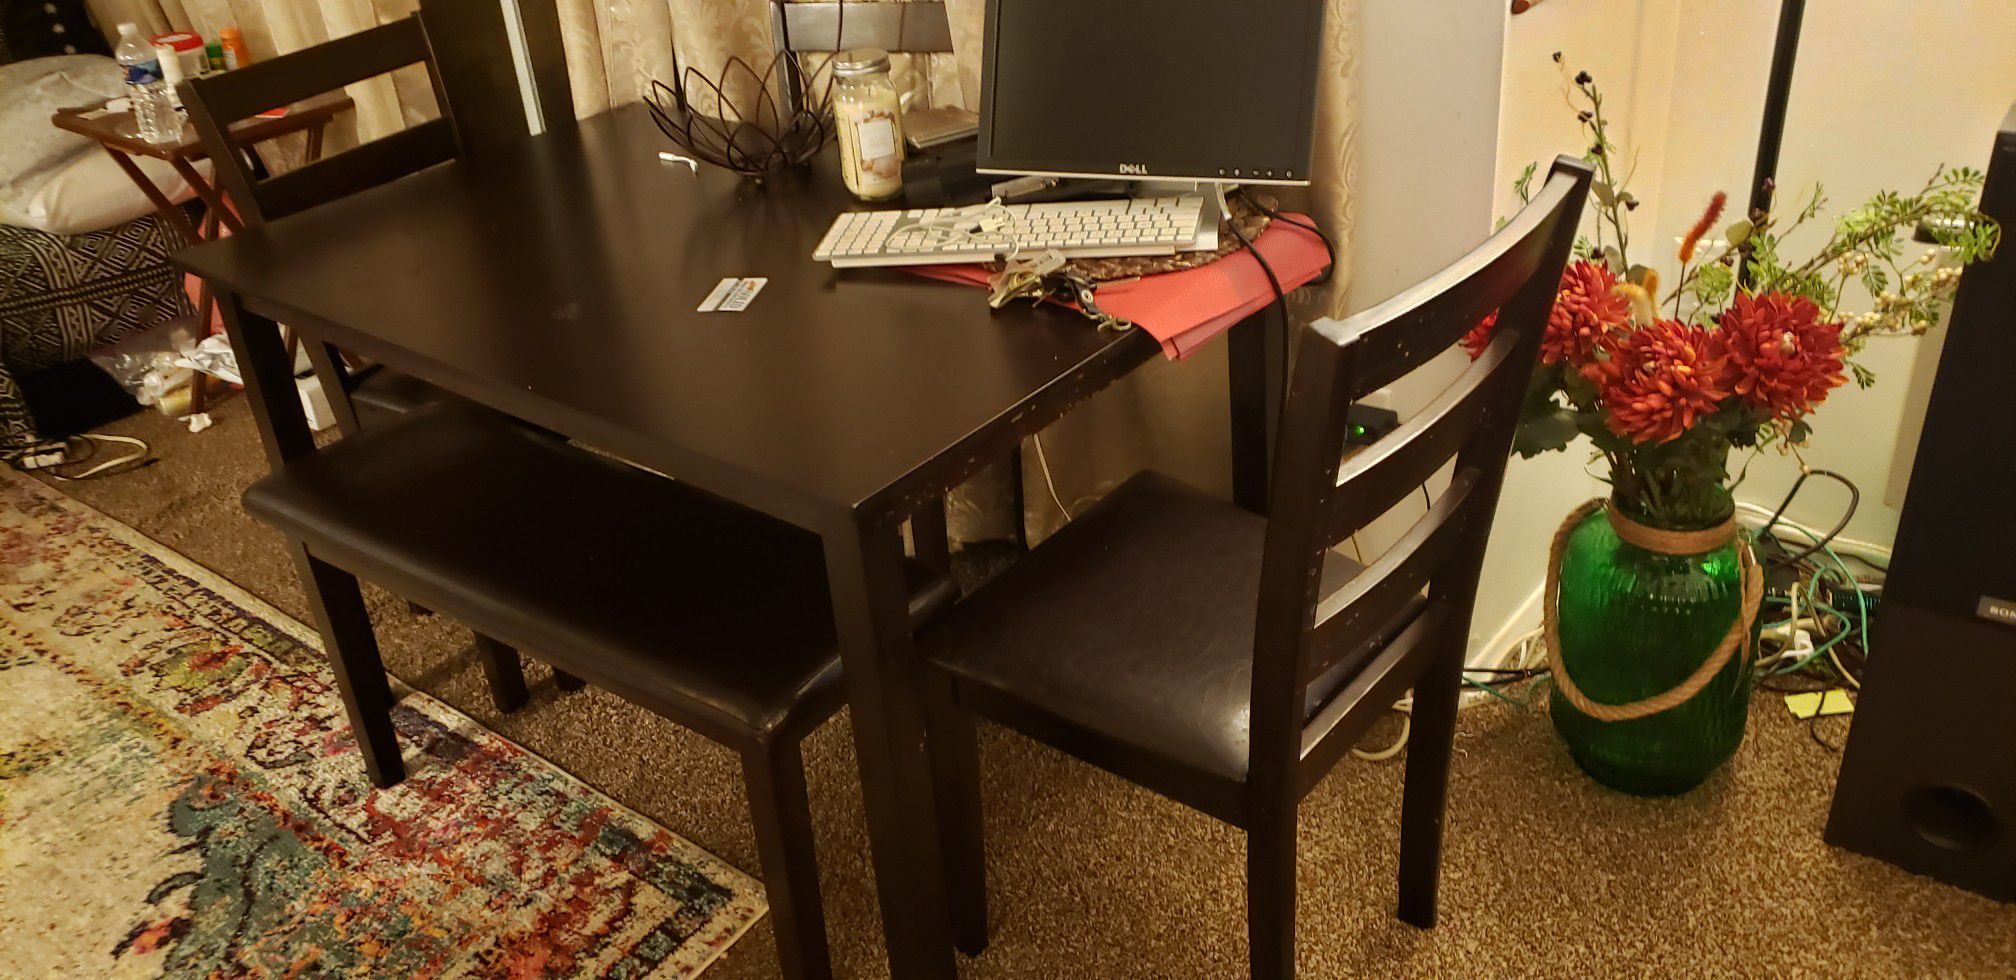 Dinning table with 2 chairs and stool